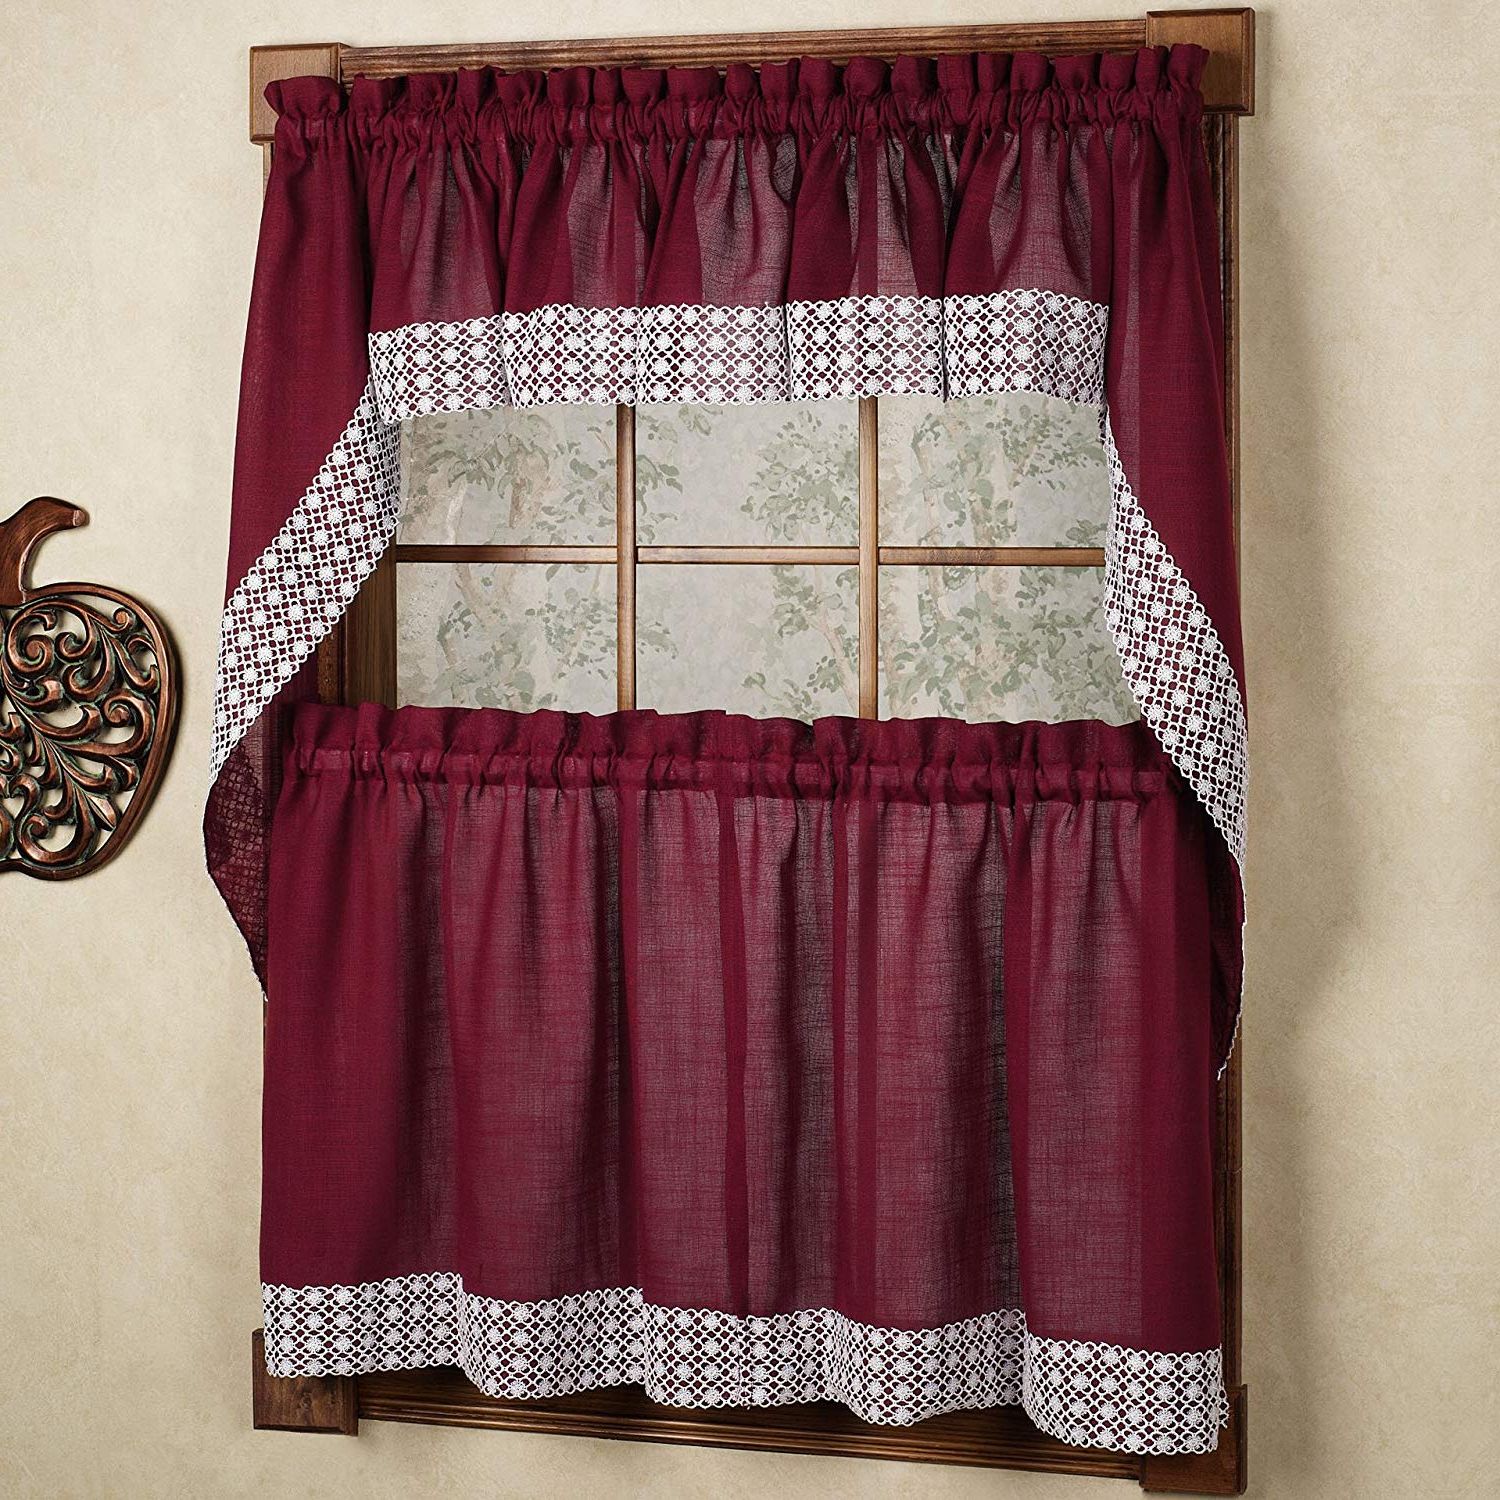 Cotton Lace 5 Piece Window Tier And Swag Sets Within Most Up To Date Amazon: Sweet Home Collection 5 Pc Kitchen Curtain Set (View 15 of 20)